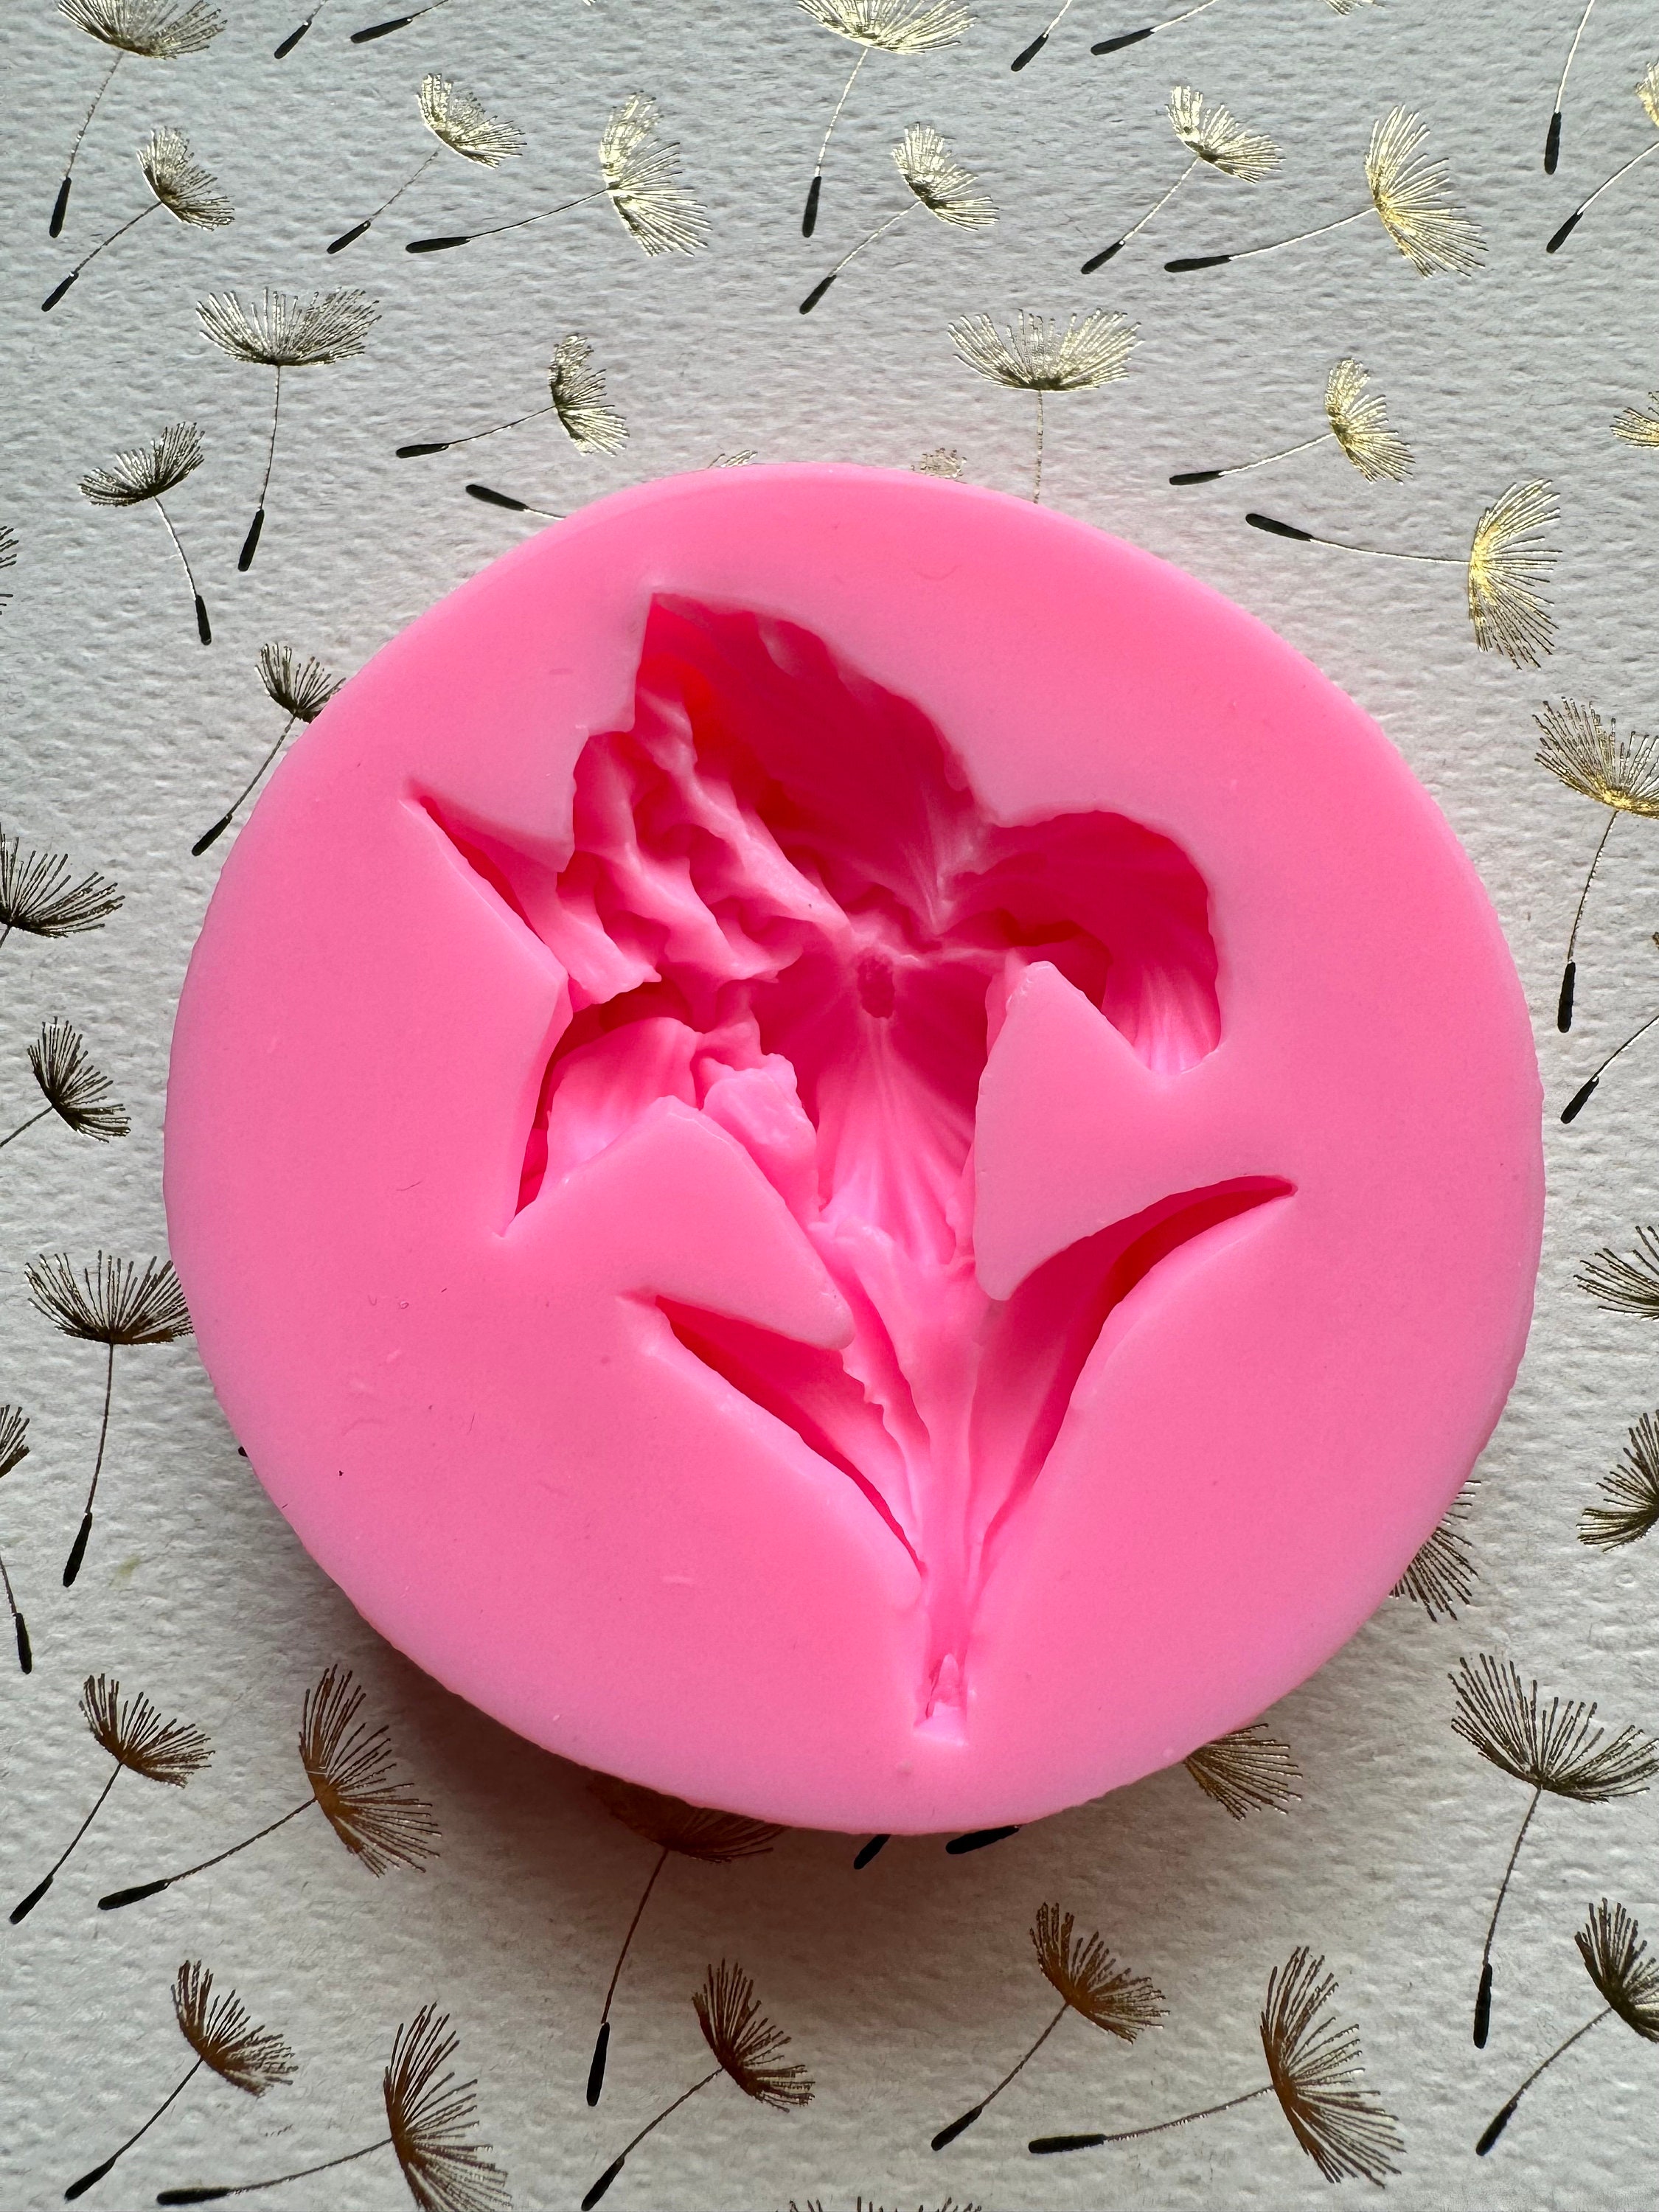 Flower Silicone Molds Rose Chocolate Candy Mould For Fat Bombs Gummy Cake  Cupcake Soap Candle Decoration Wax Melts Ice Cube - Cake Tools - AliExpress